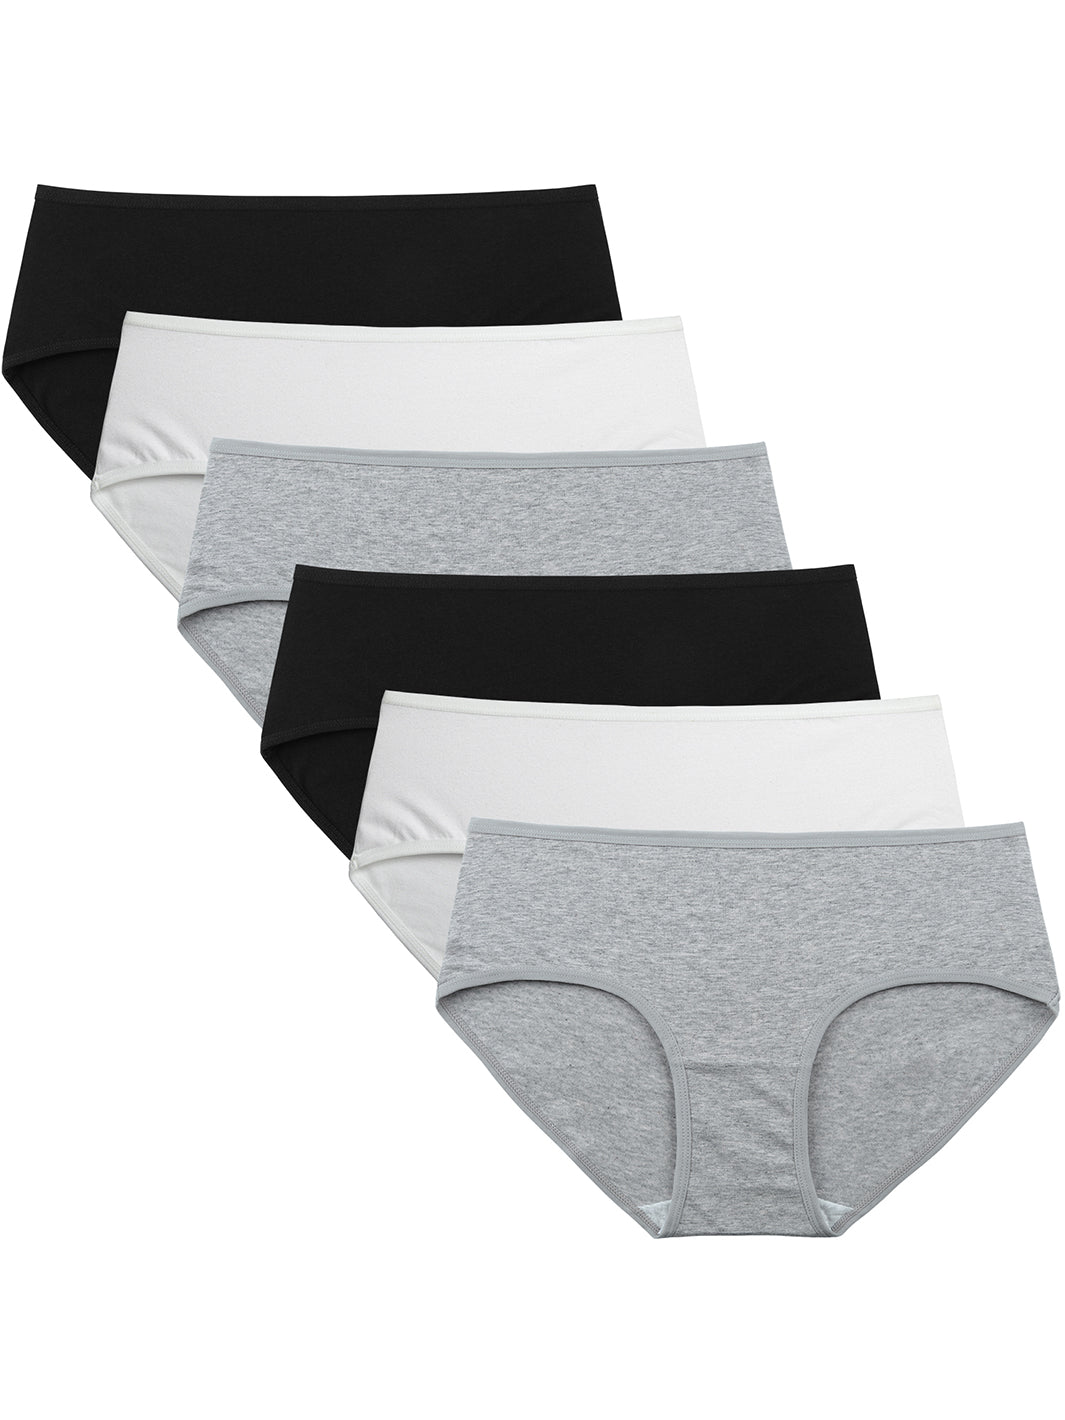 INNERSY Womens Underwear Cotton Hipster Panties Low Rise Basics Underwear  6-Pack (Small, Sport Stripes)